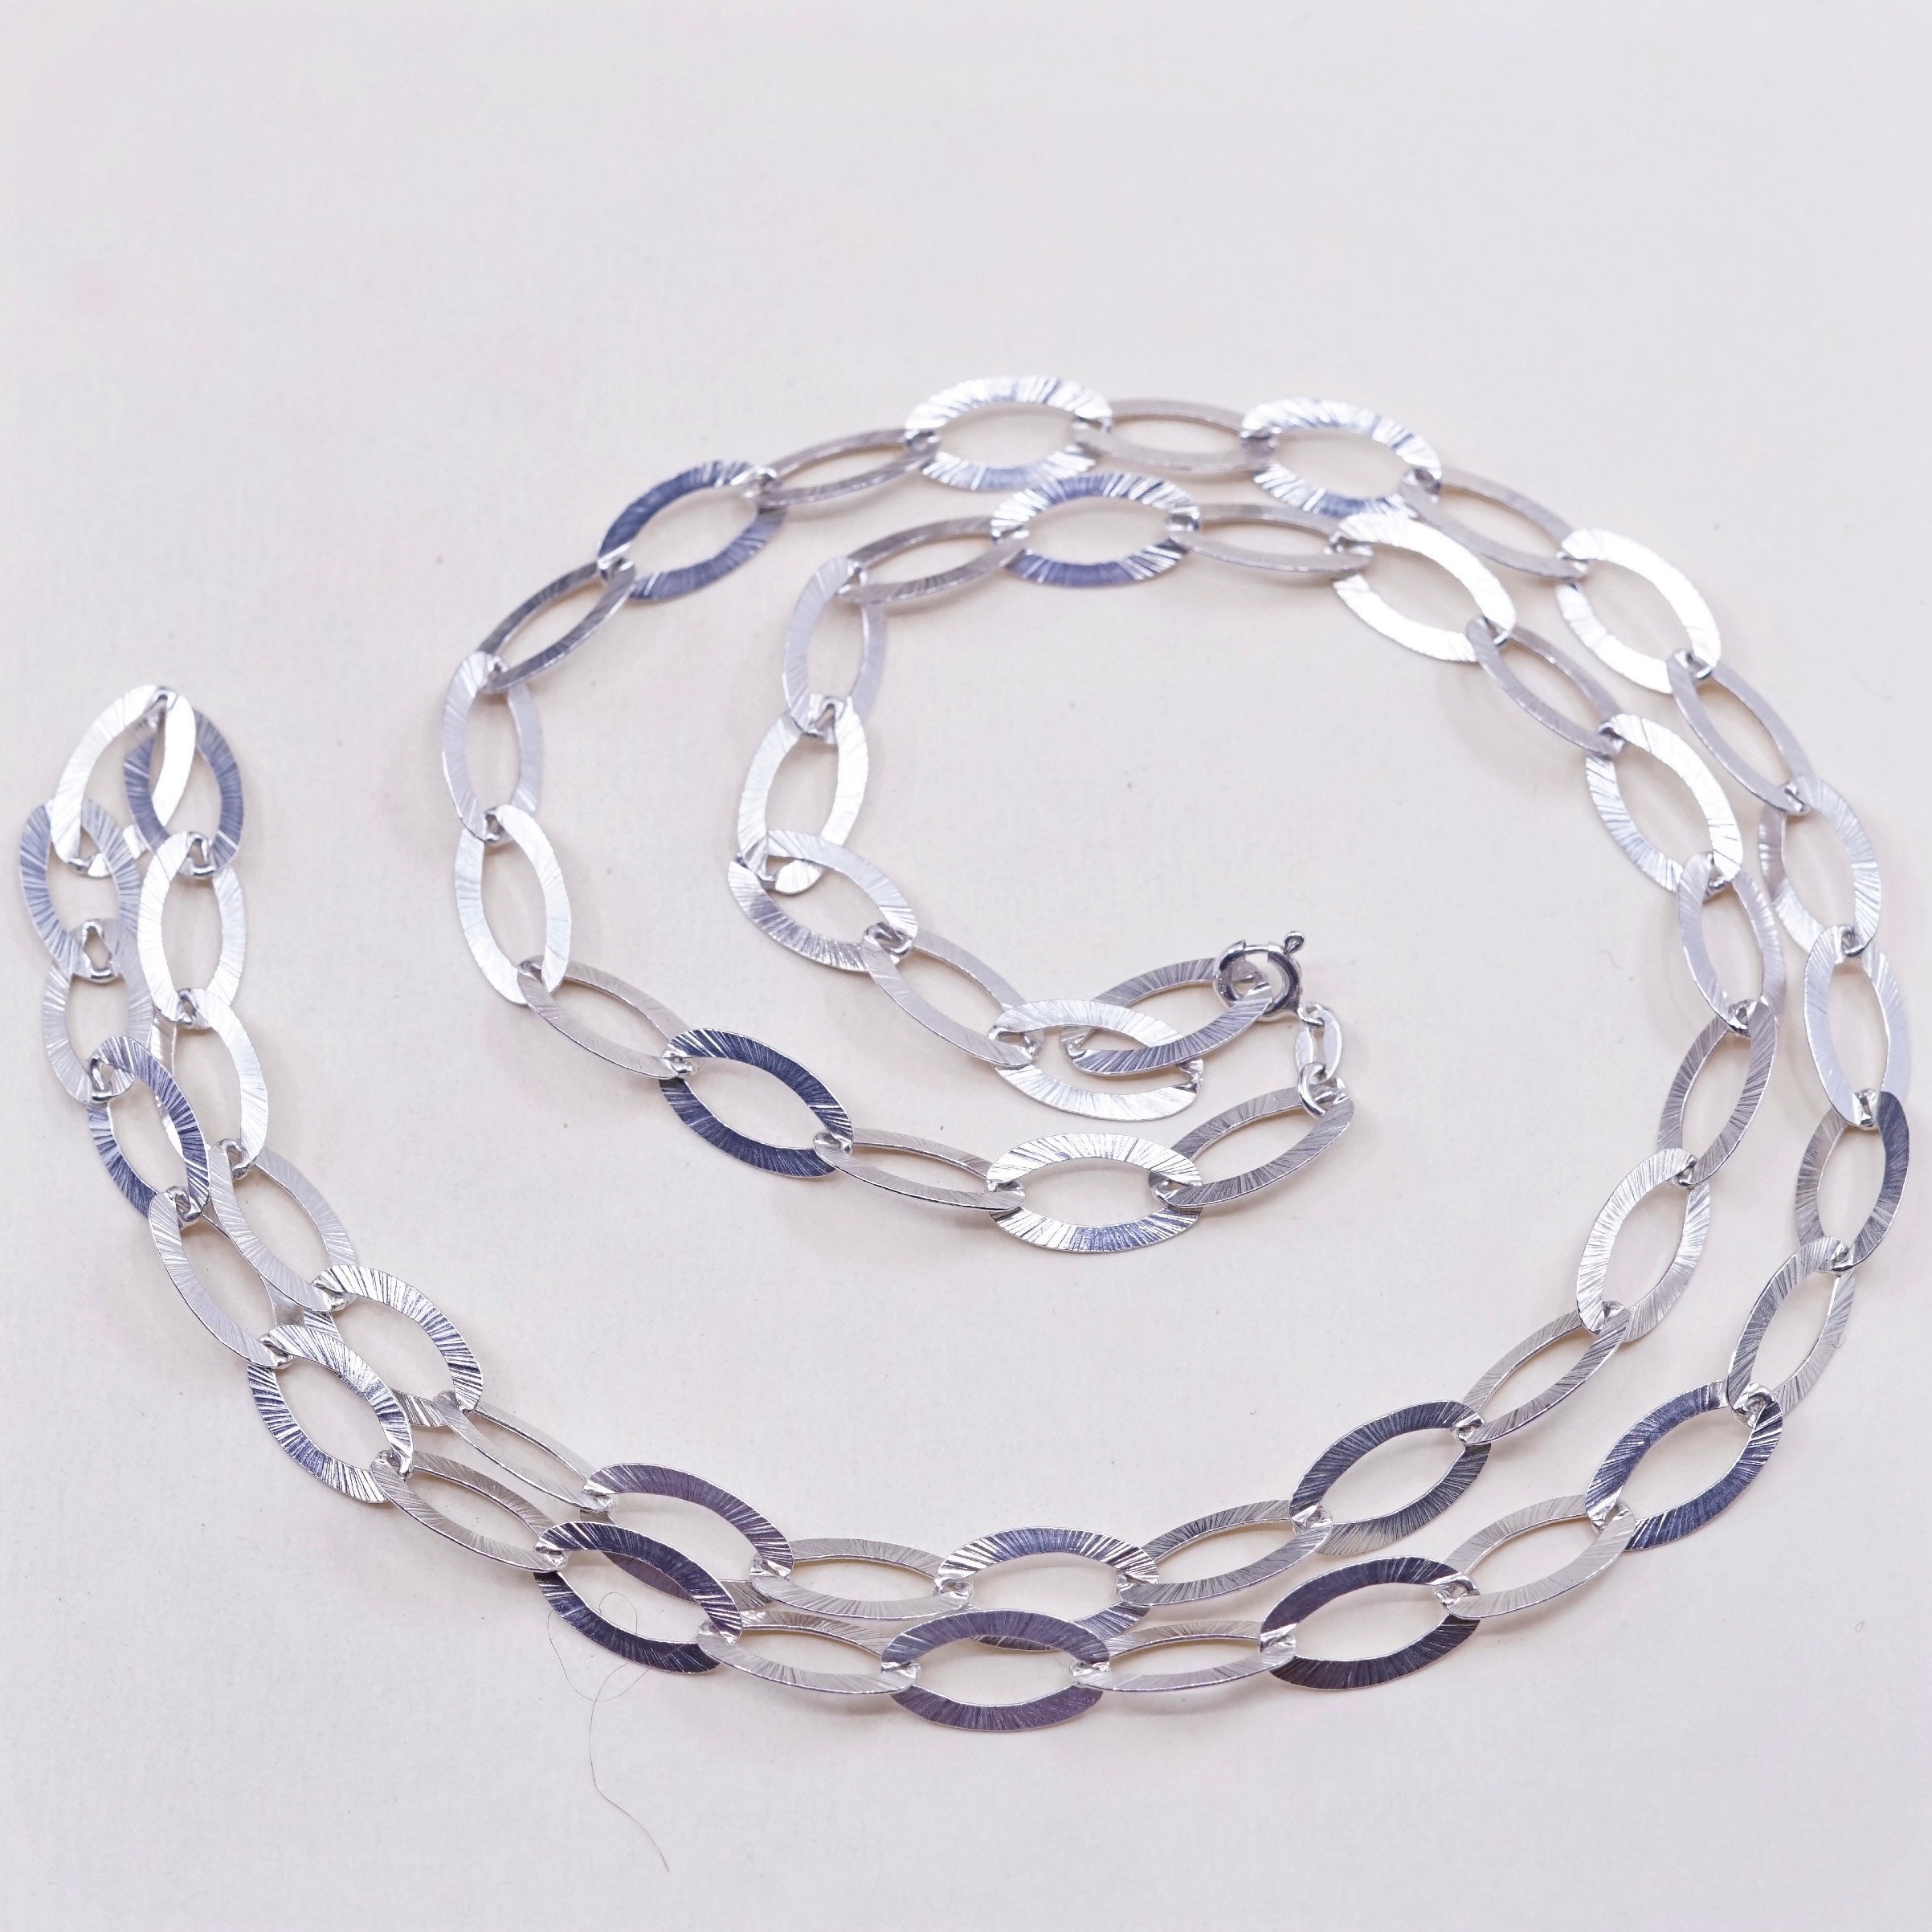 Buy 925 Solid Silver Rhodium Plated Twist Rope Chain,1.2mm 1.5mm 1.8mm  2.3mm 3mm 3.5mm 4mm 4.5mm 5.5mm 6.5mm,everyday Chain, Gift, Sale Online in  India - Etsy